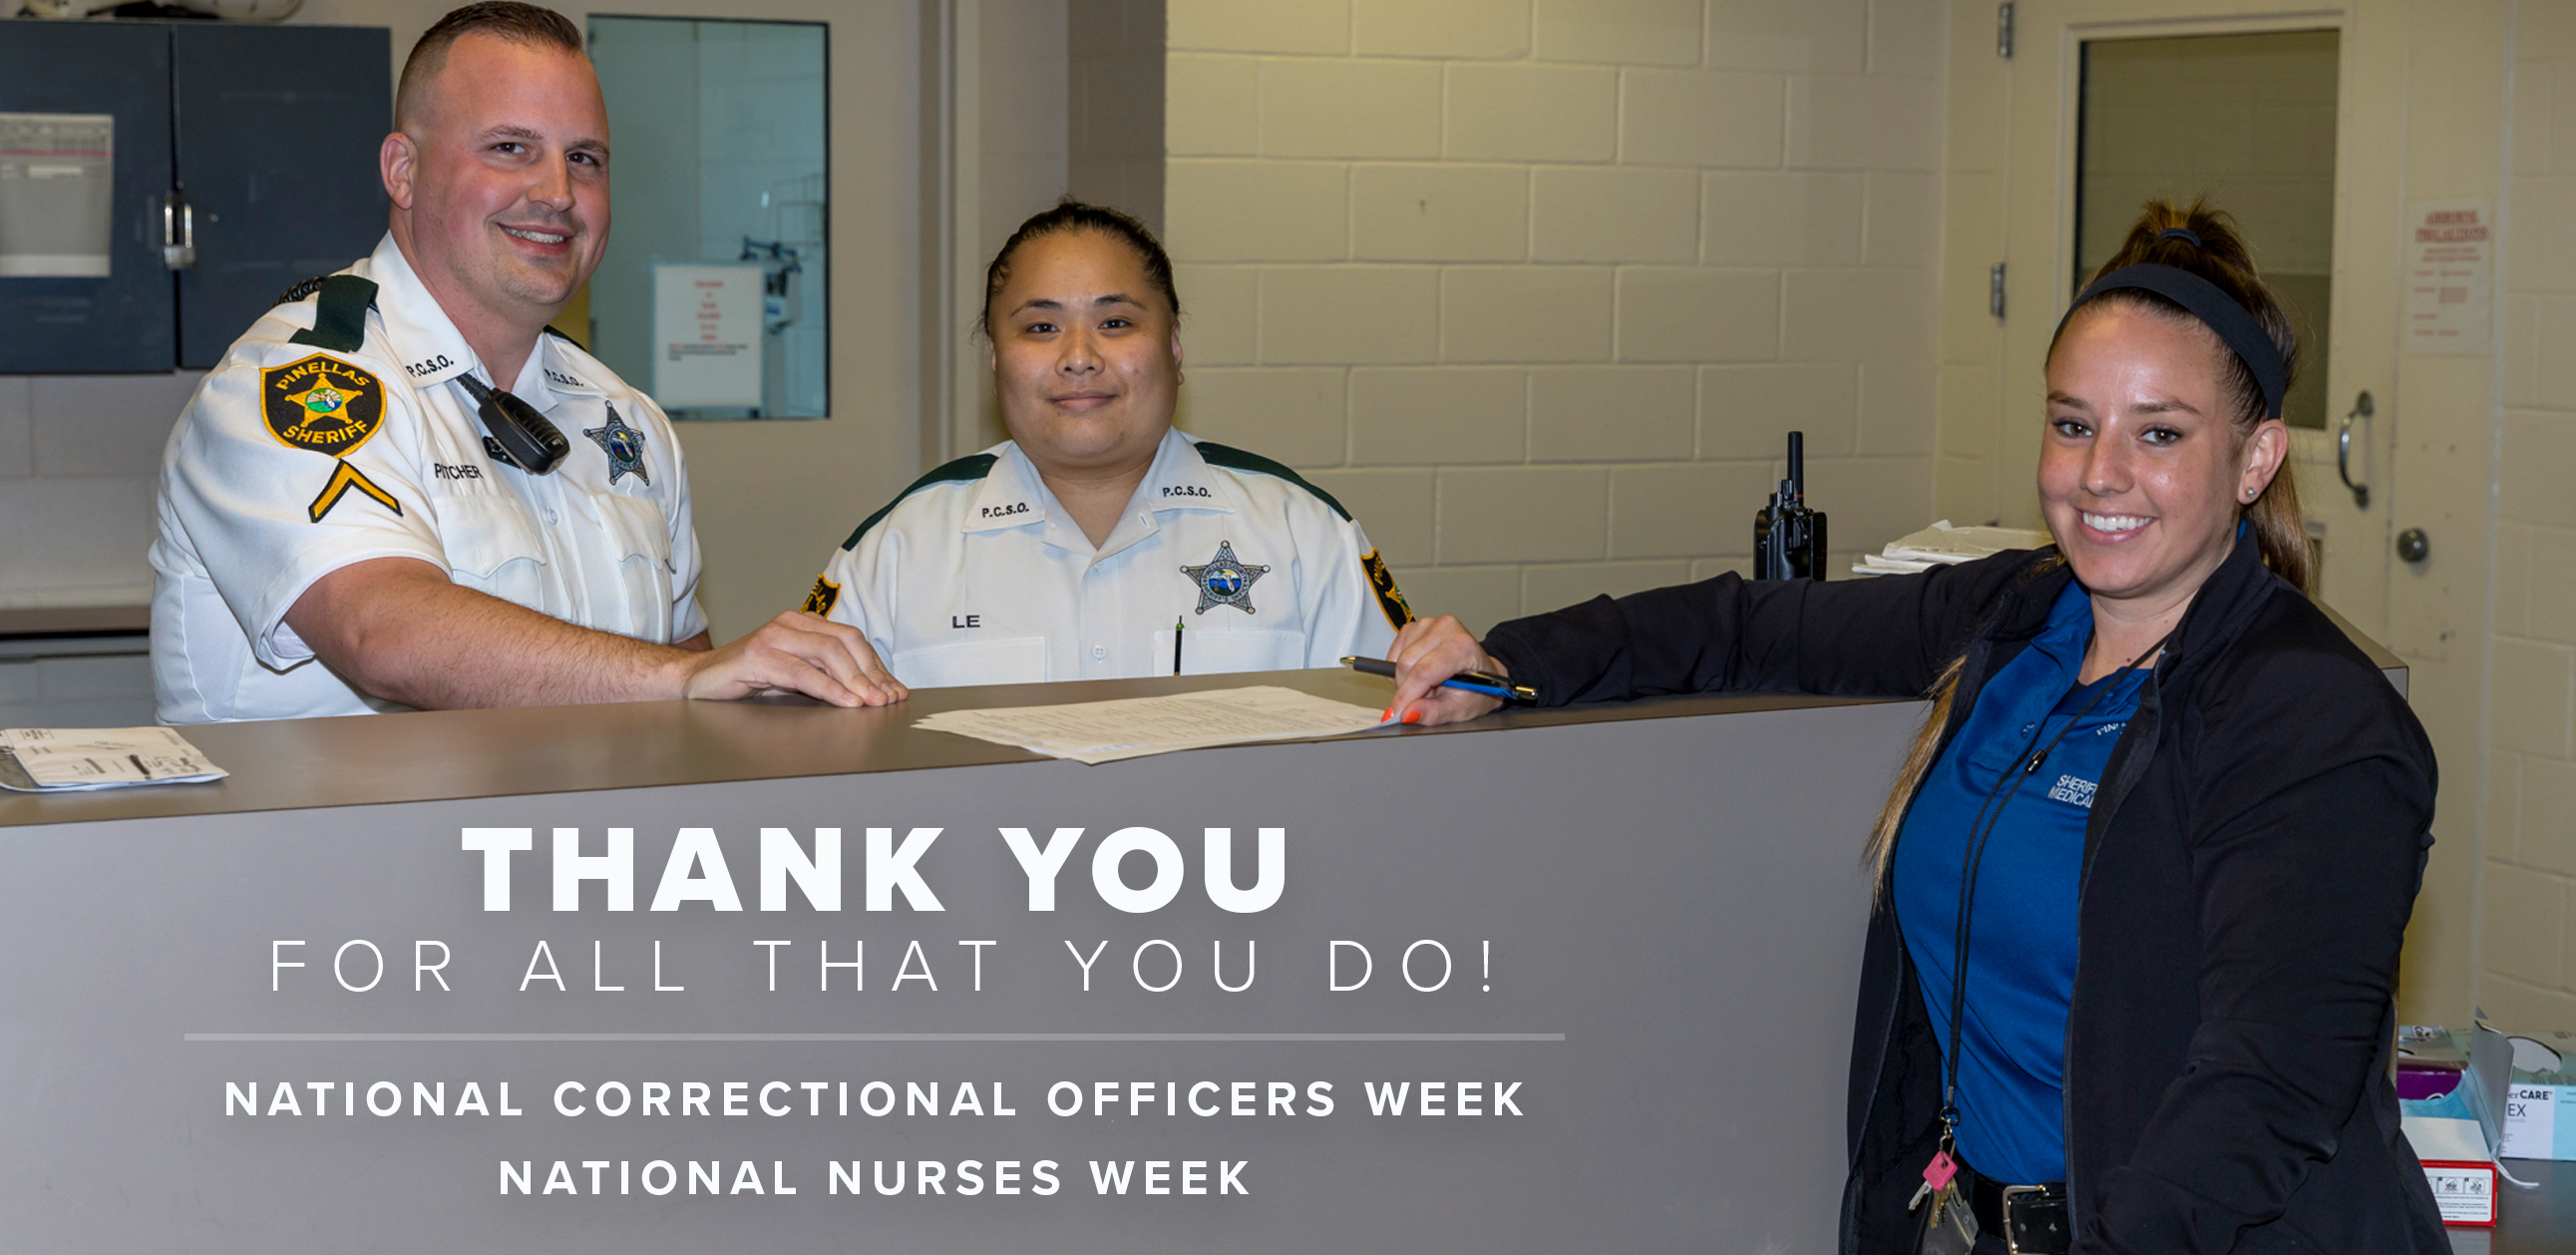 Thank you for all that you do, National Nurses Week, National Corrections Week